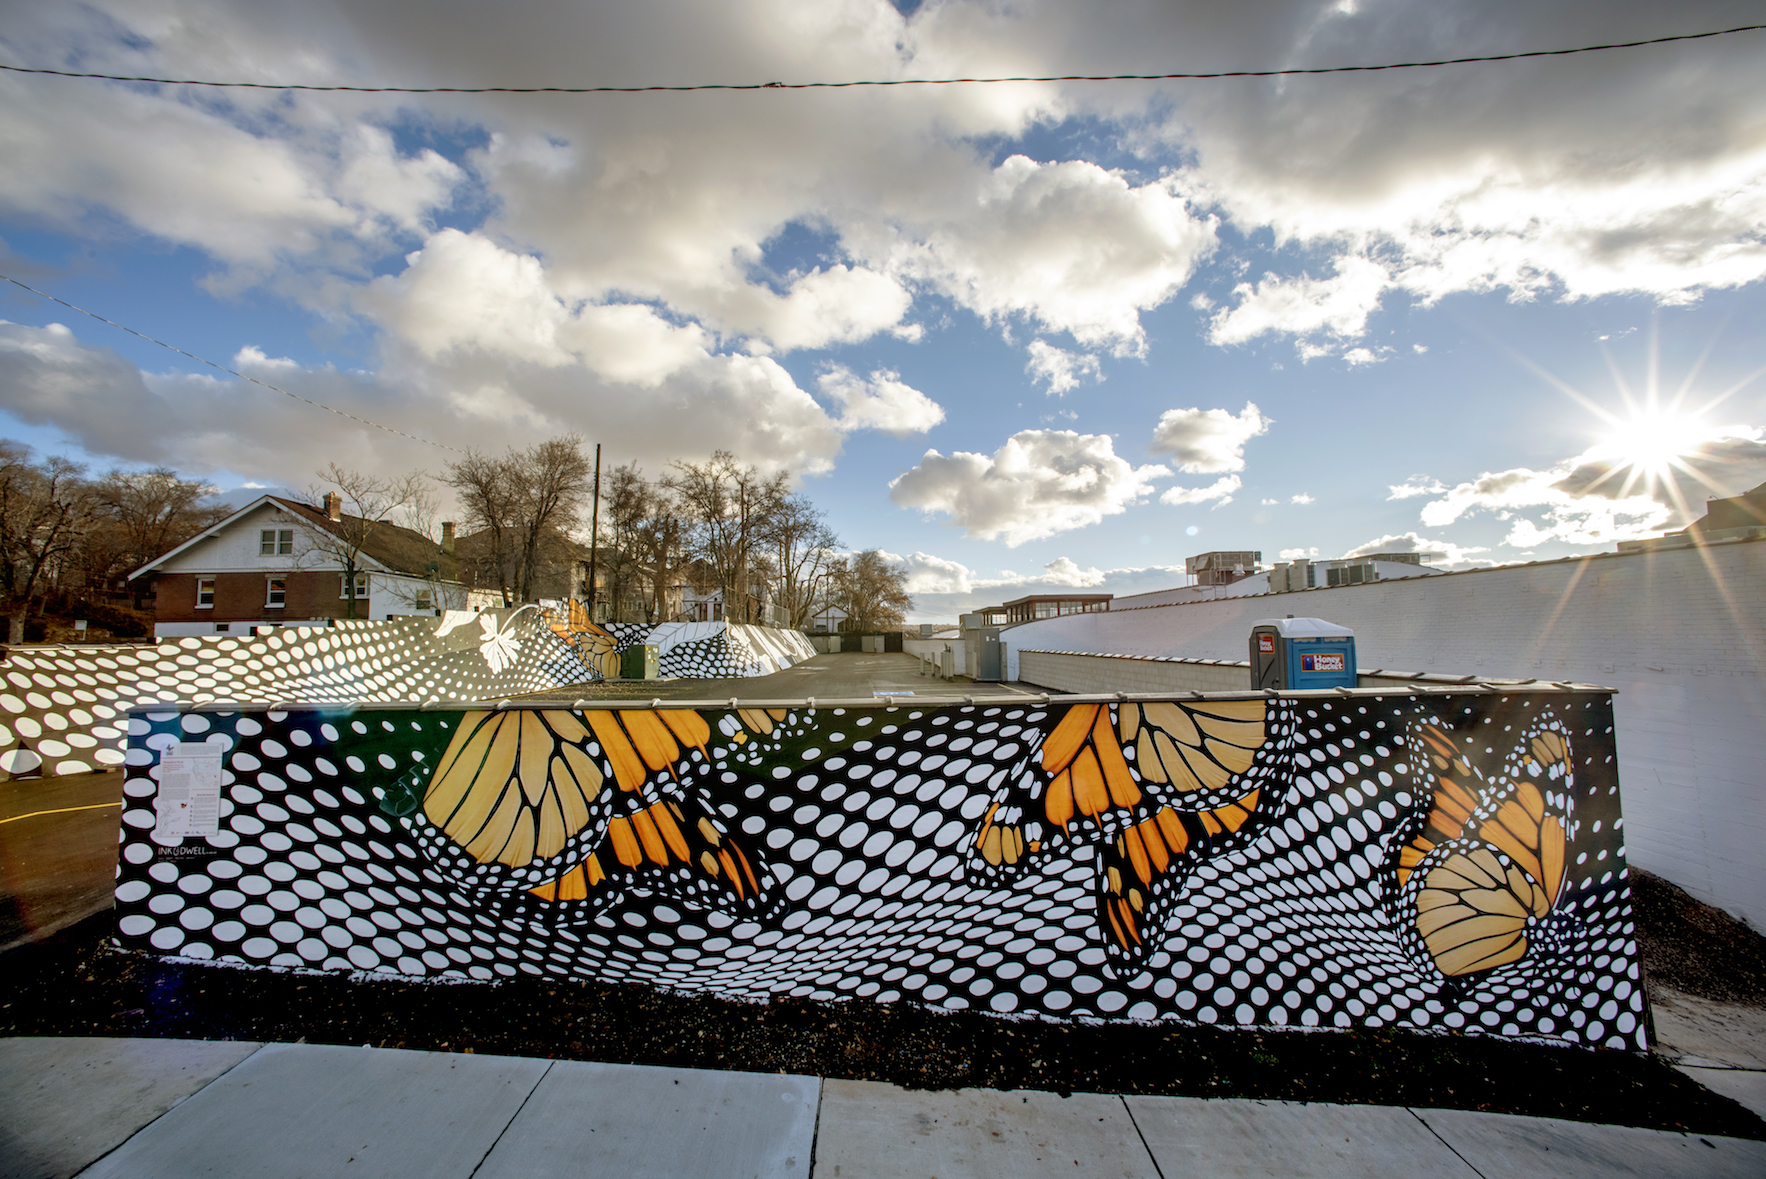 Dramatic black-and-white patterns contrast the bold orange-and-black wings of monarch butterflies in the Monarch in Moda mural in Ogden, Utah.